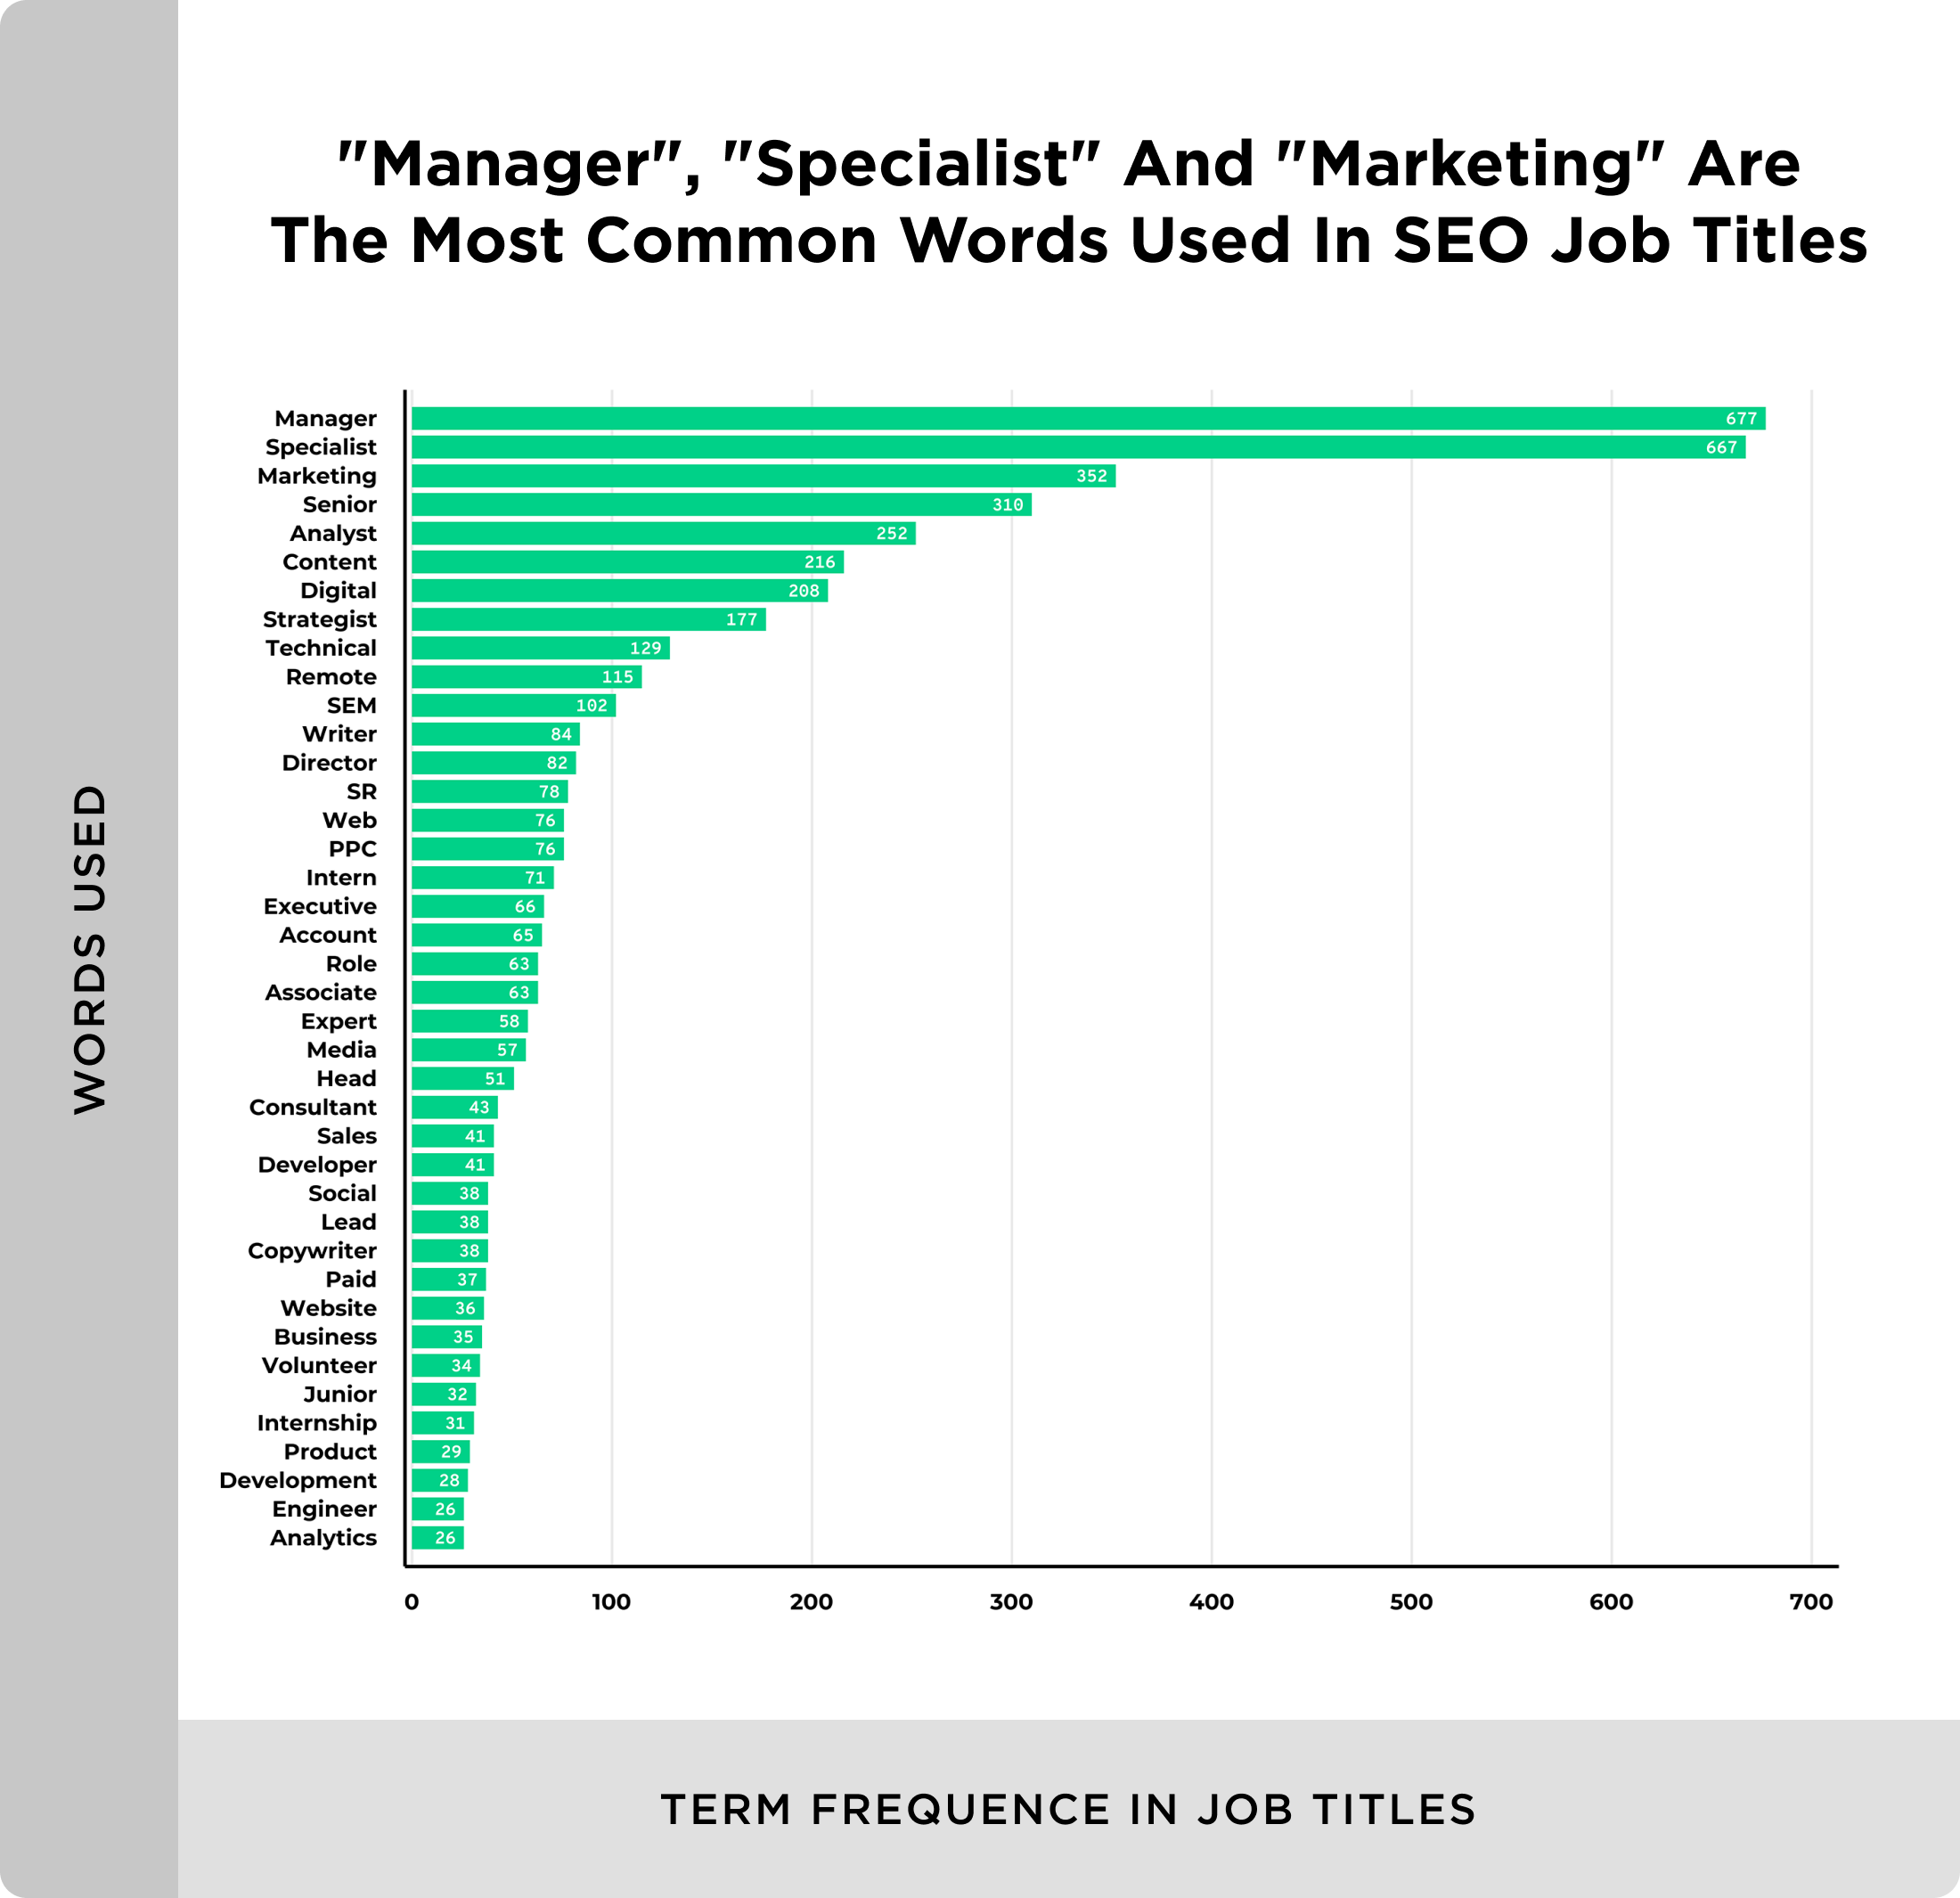 Most common words in SEO job titles